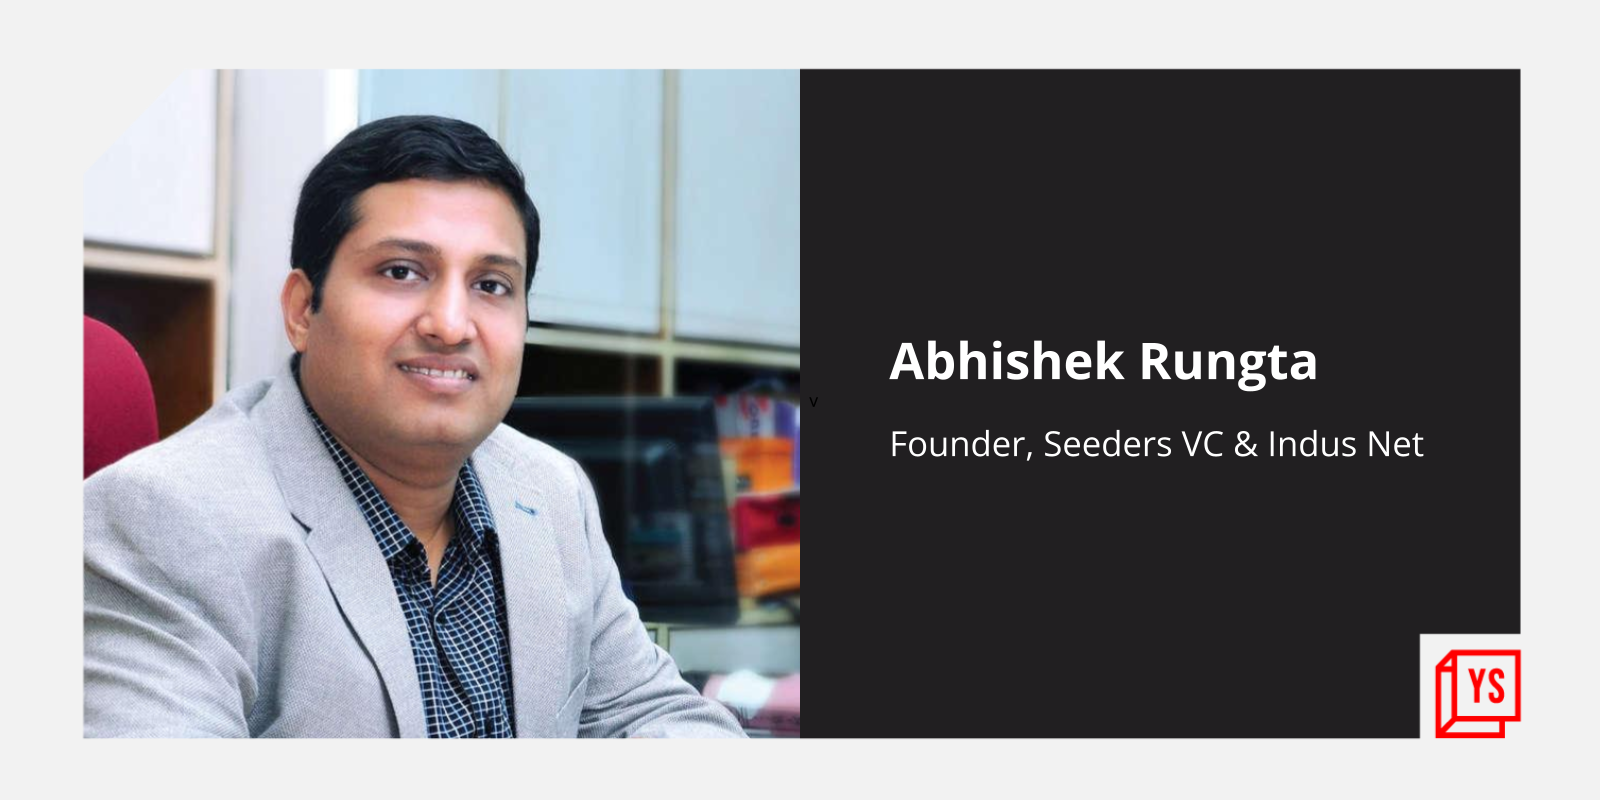 With more than 100 investments and 8 exits under his belt, Abhishek Rungta advises investing in founders more than business models
